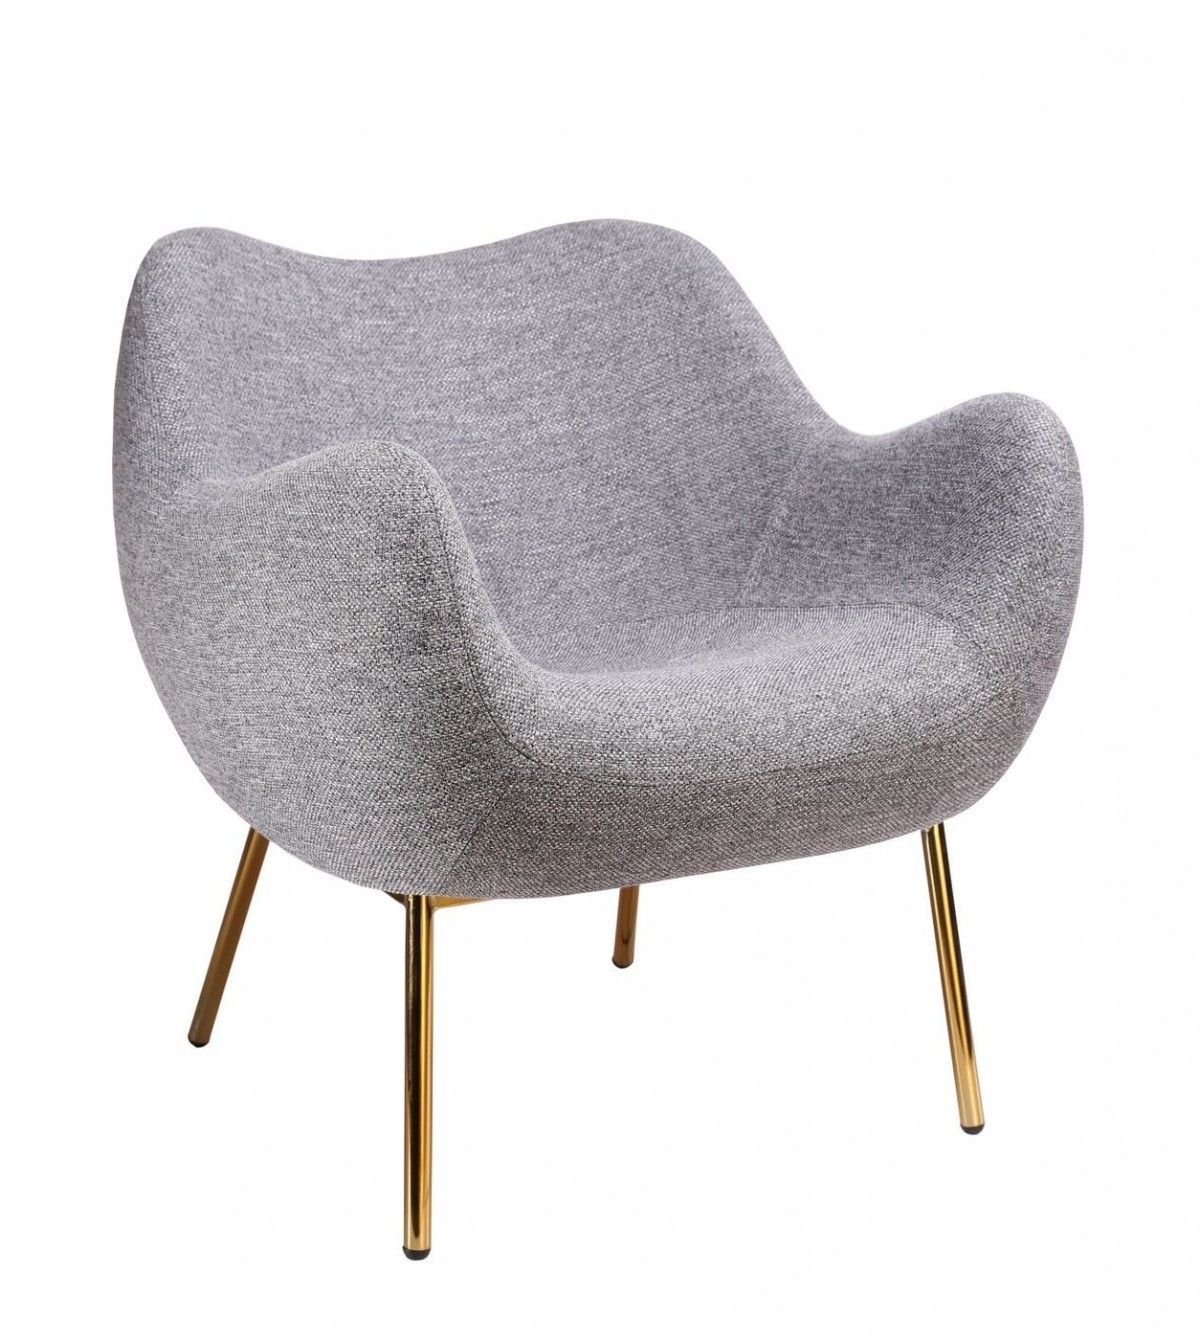 "29"" Plush Grey and Gold Comfy Accent Chair"